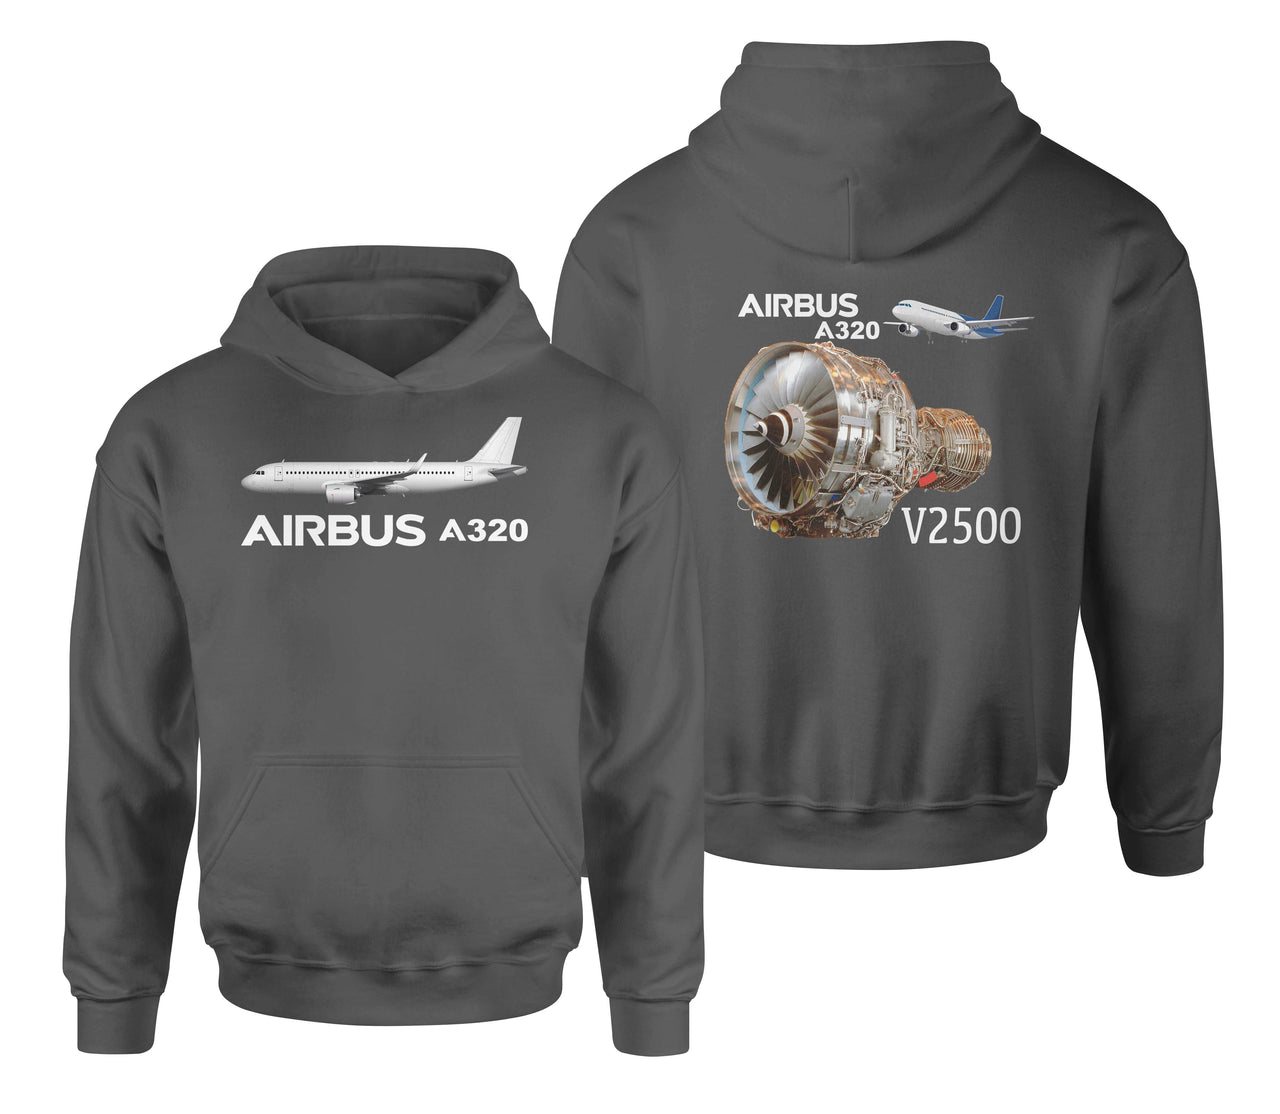 Airbus A320 & V2500 Engine Designed Double Side Hoodies